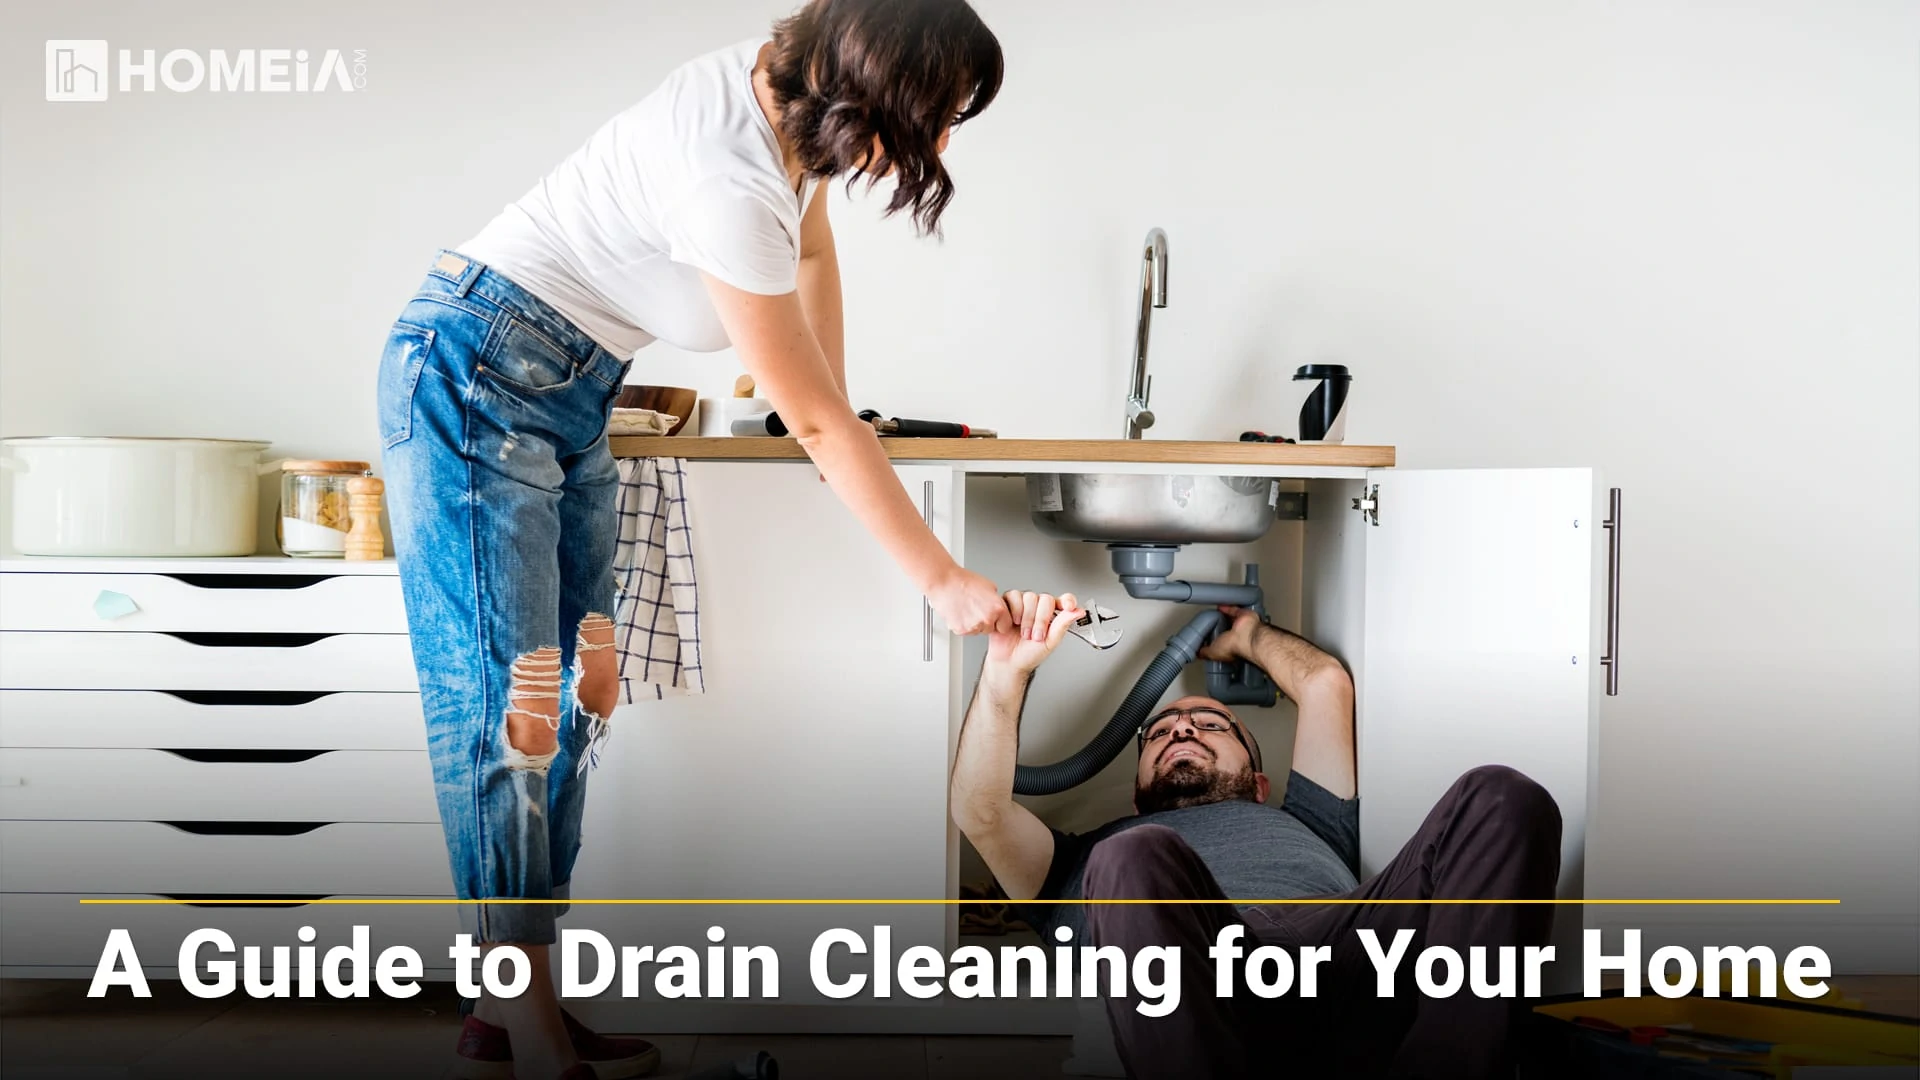 A Guide to Drain Cleaning for Your Home